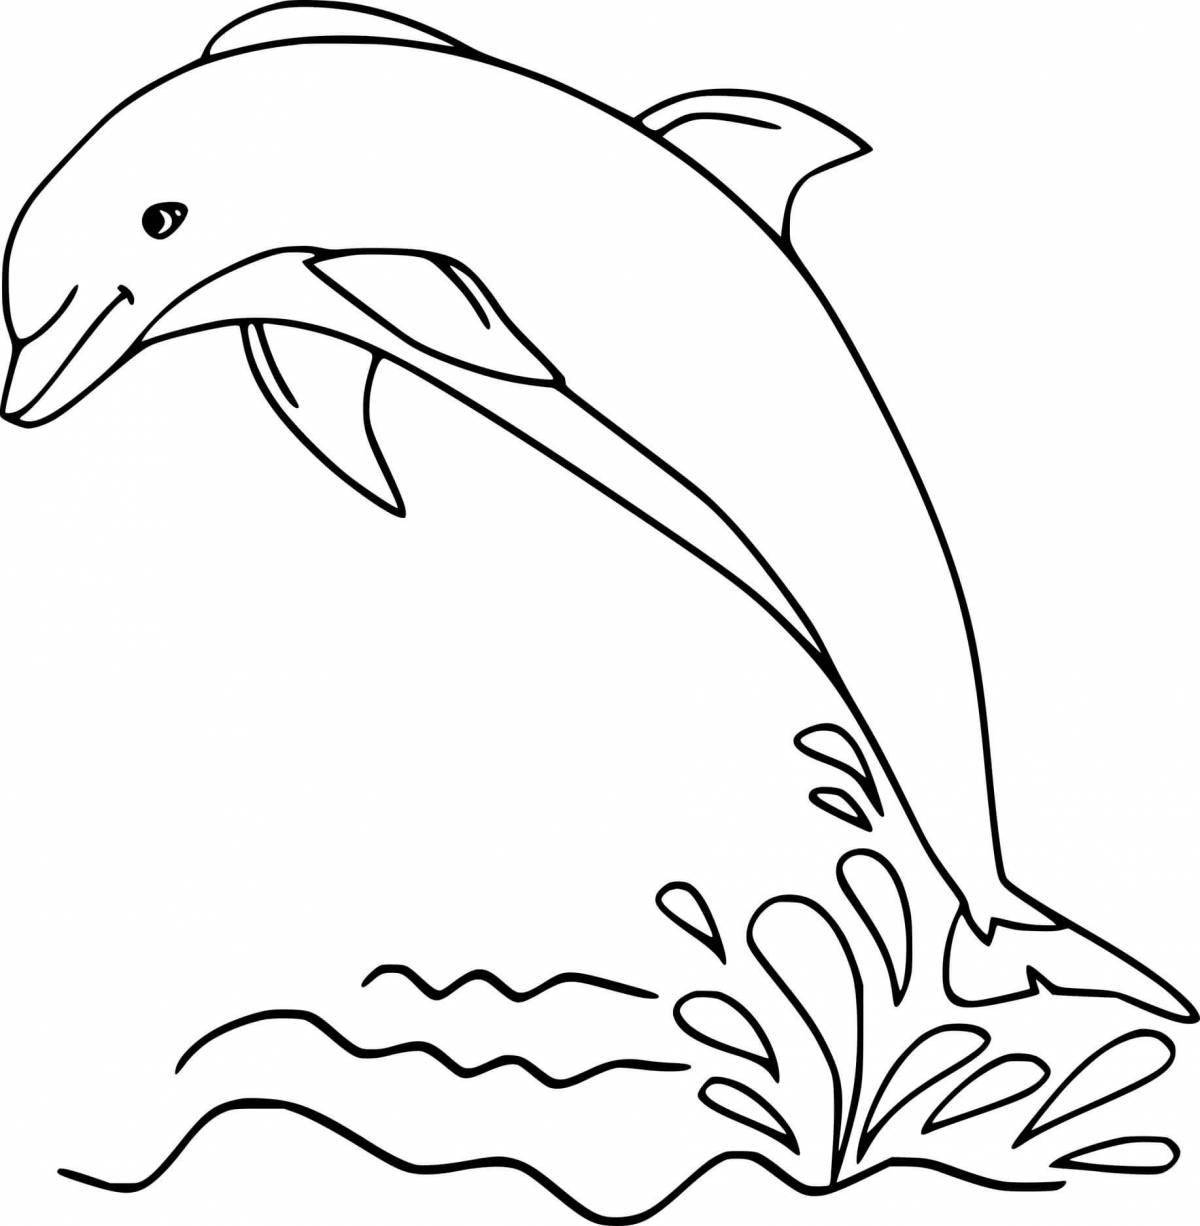 Romantic dolphin coloring page